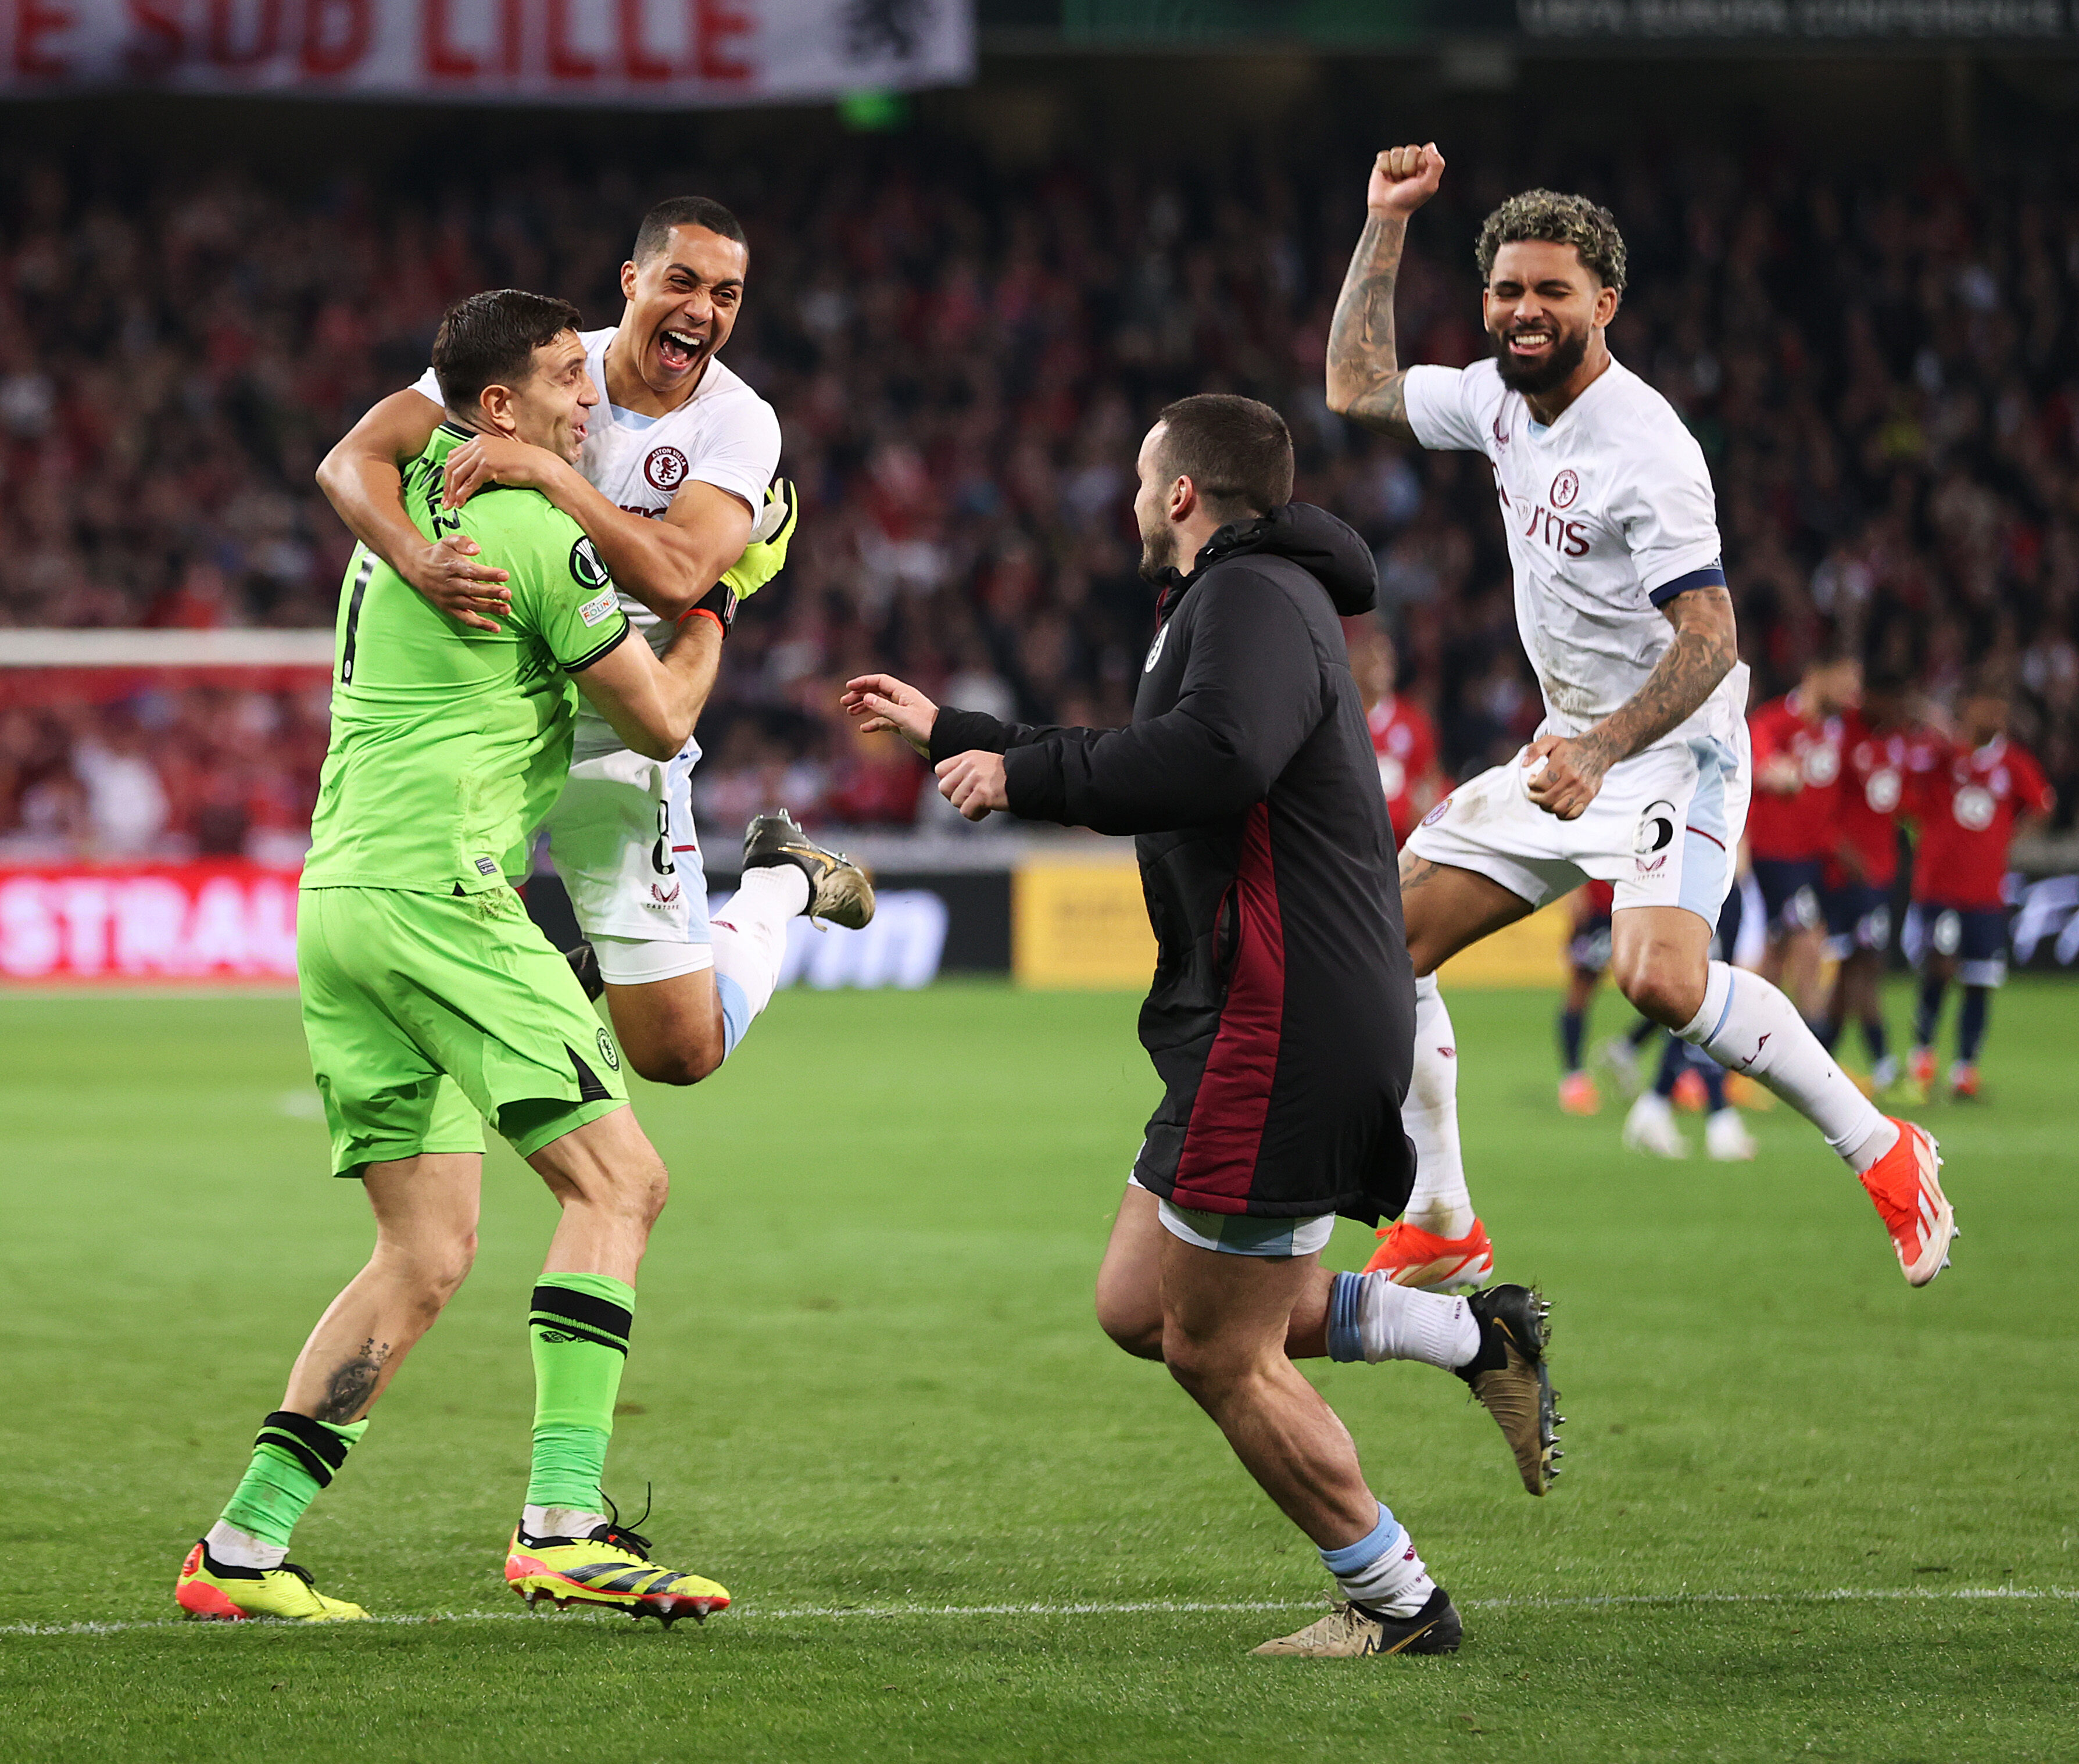 Villa fans react to Martinez’s penalty shootout heroics – But why was he allowed to stay on the pitch after receiving second yellow?